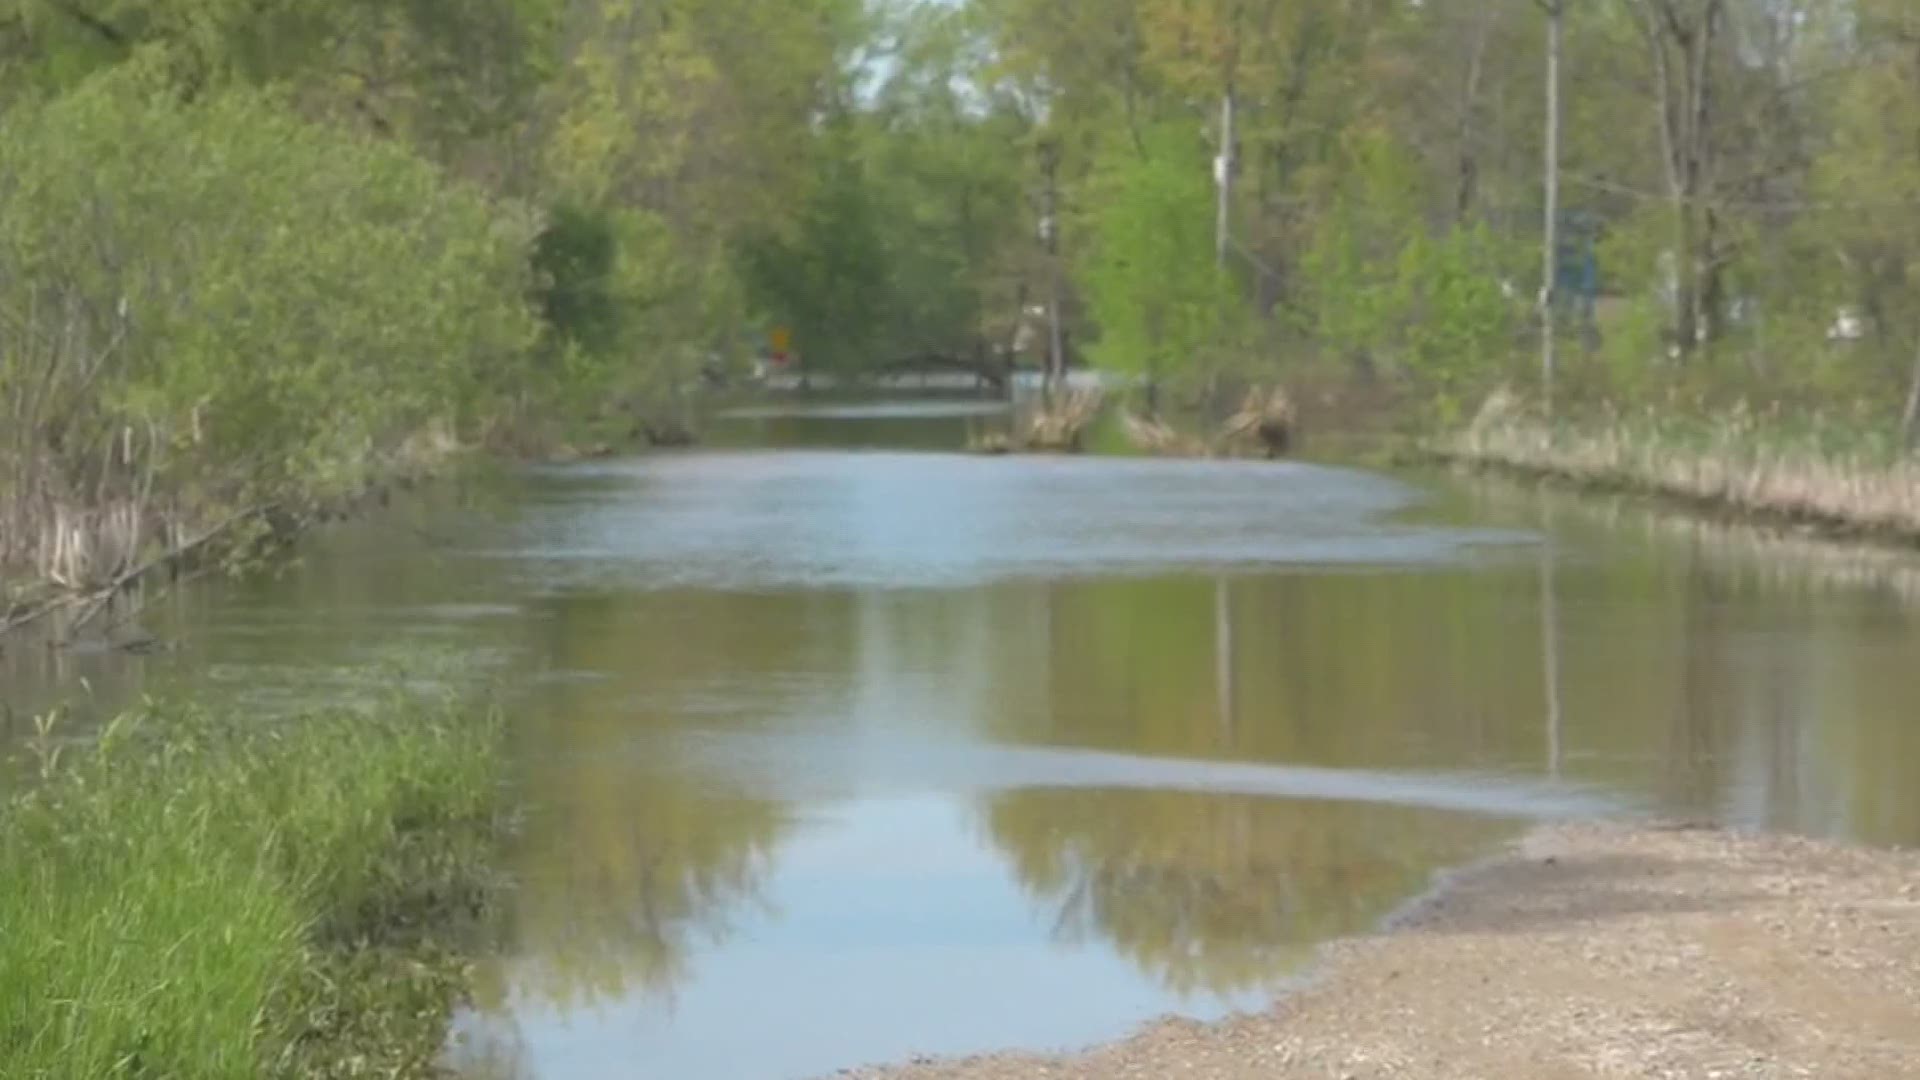 We're getting a new look at the severity of the flooding along the Grand River in Ottawa County.
This is video from Van Lopik Avenue, just east of M-231.